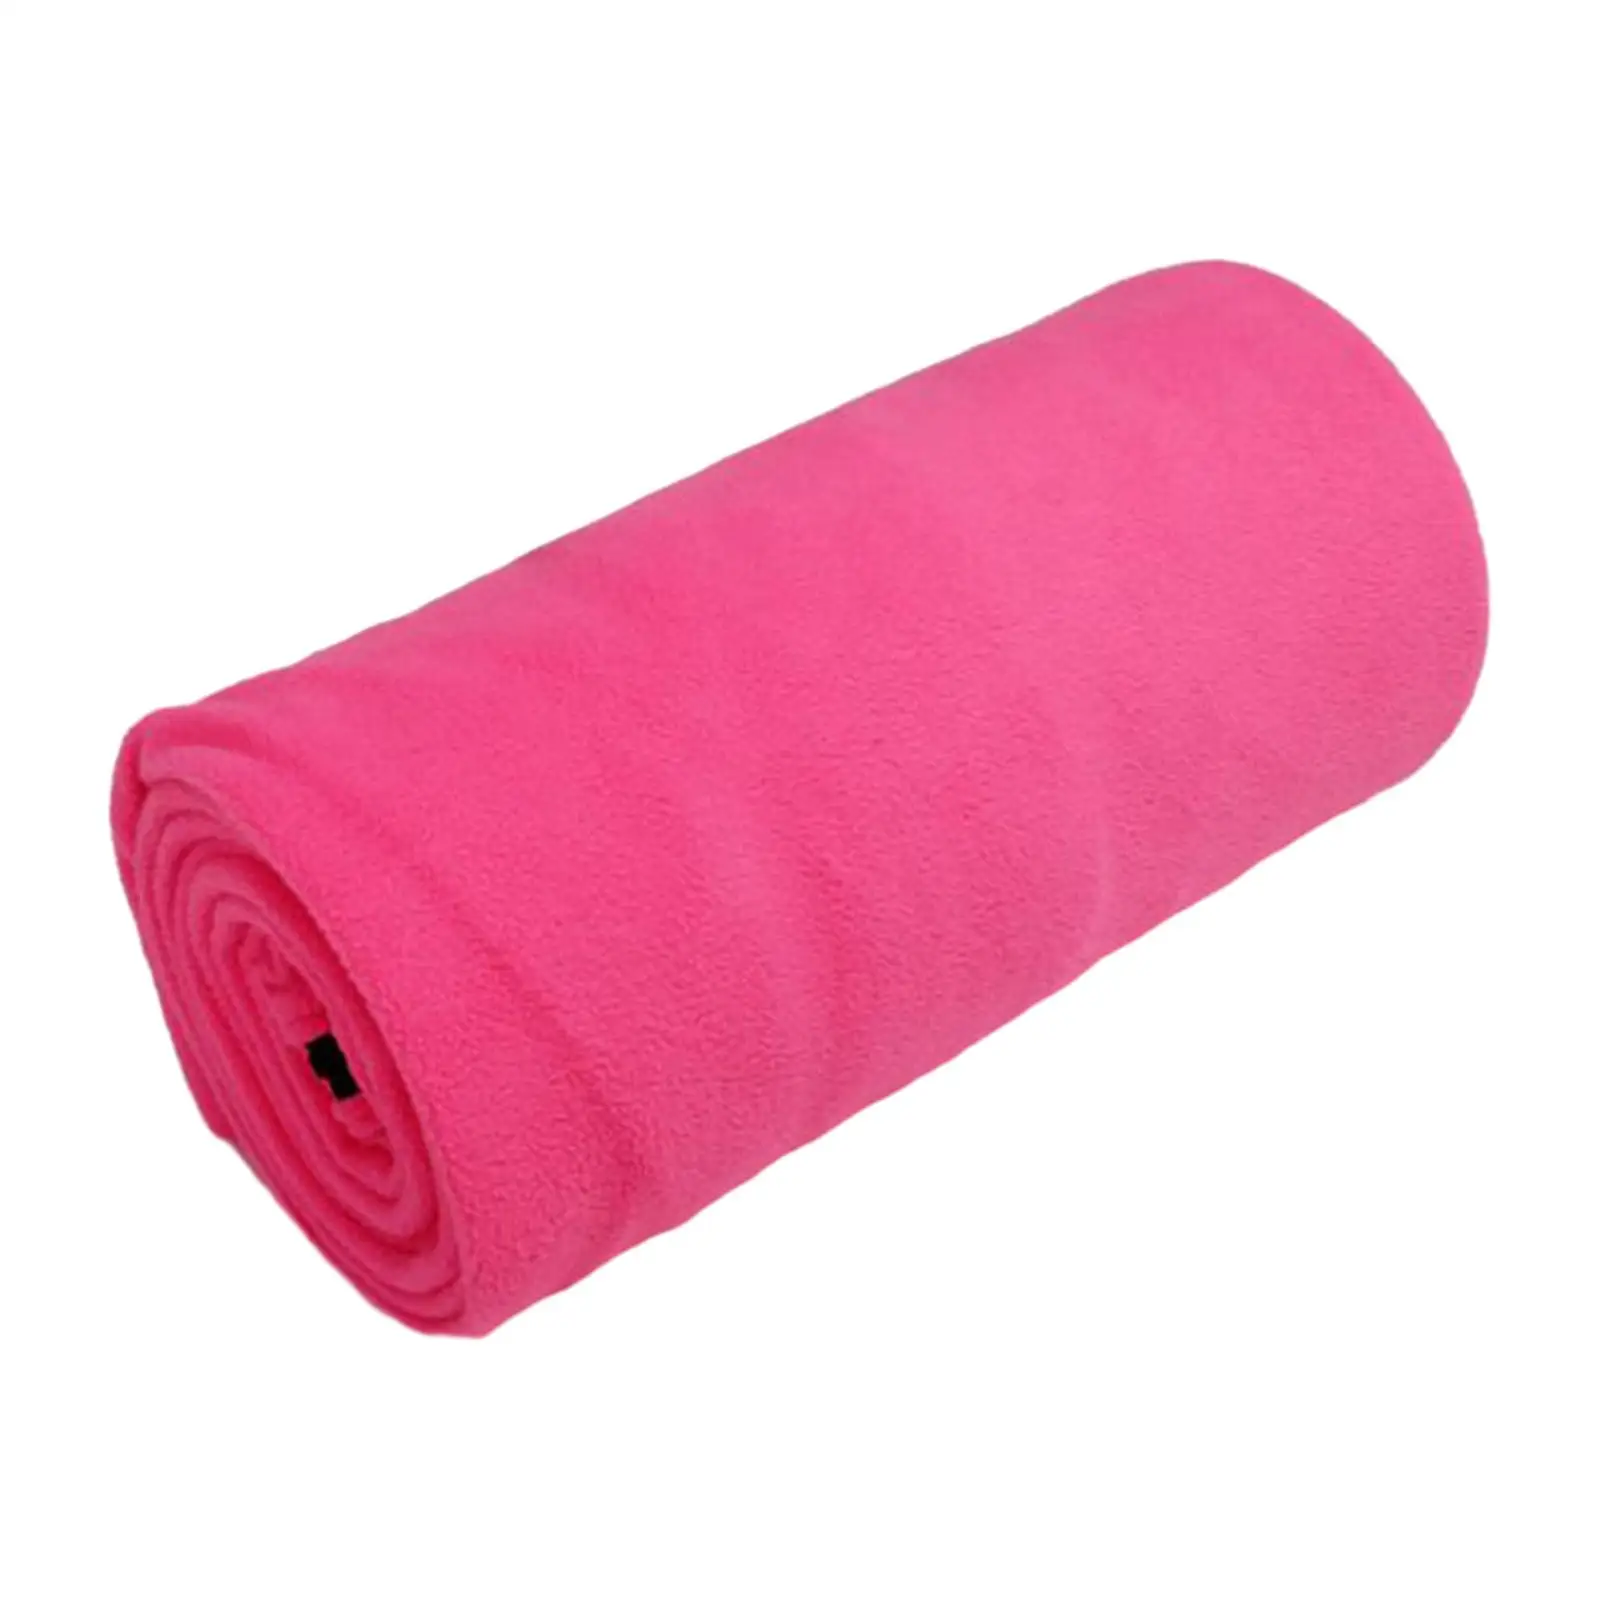 Fleece Sleeping Bag Liner Blanket Liner Ultralight Thickness Portable Thermal Warm Sleeping Bag for Travel Hiking Accessories